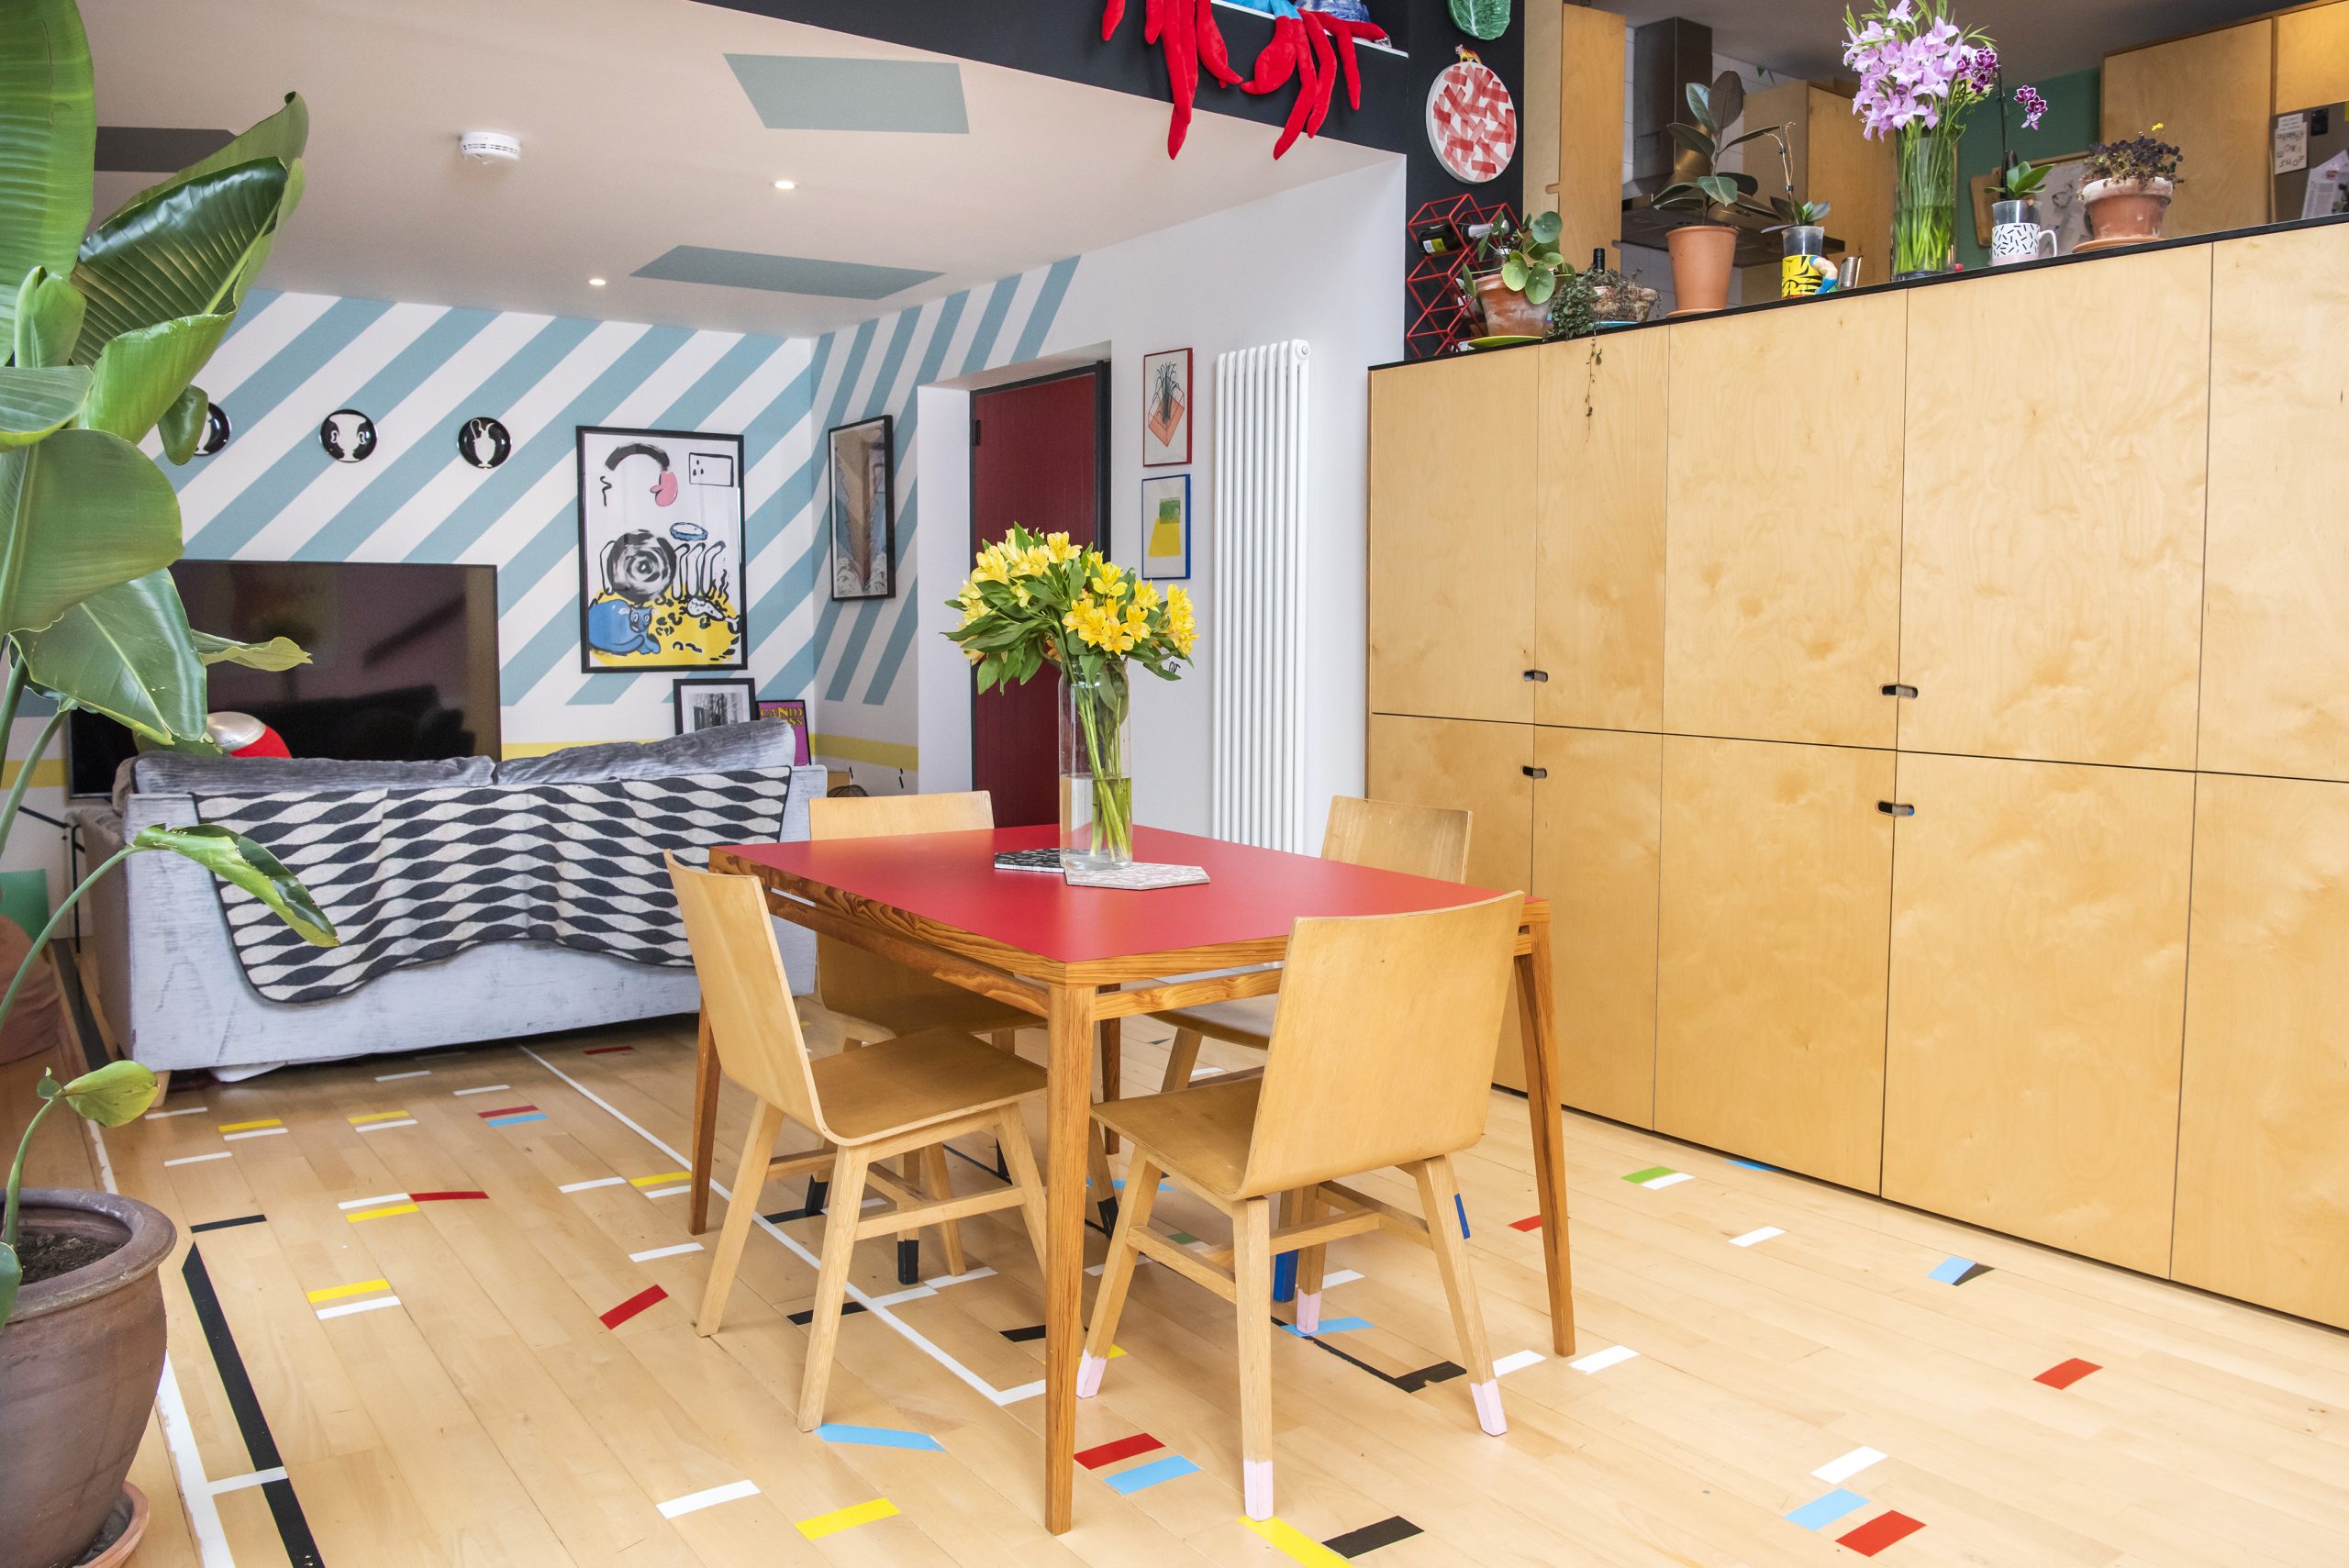 A 1960s extended bungalow on Scotland's Home of the Year 2024 - home to Anna, Harry and their daughters, Marley and Lexie. The twice-extended home boasts clever decorating techniques and reclaimed materials including school gym hall flooring complete with colourful markers